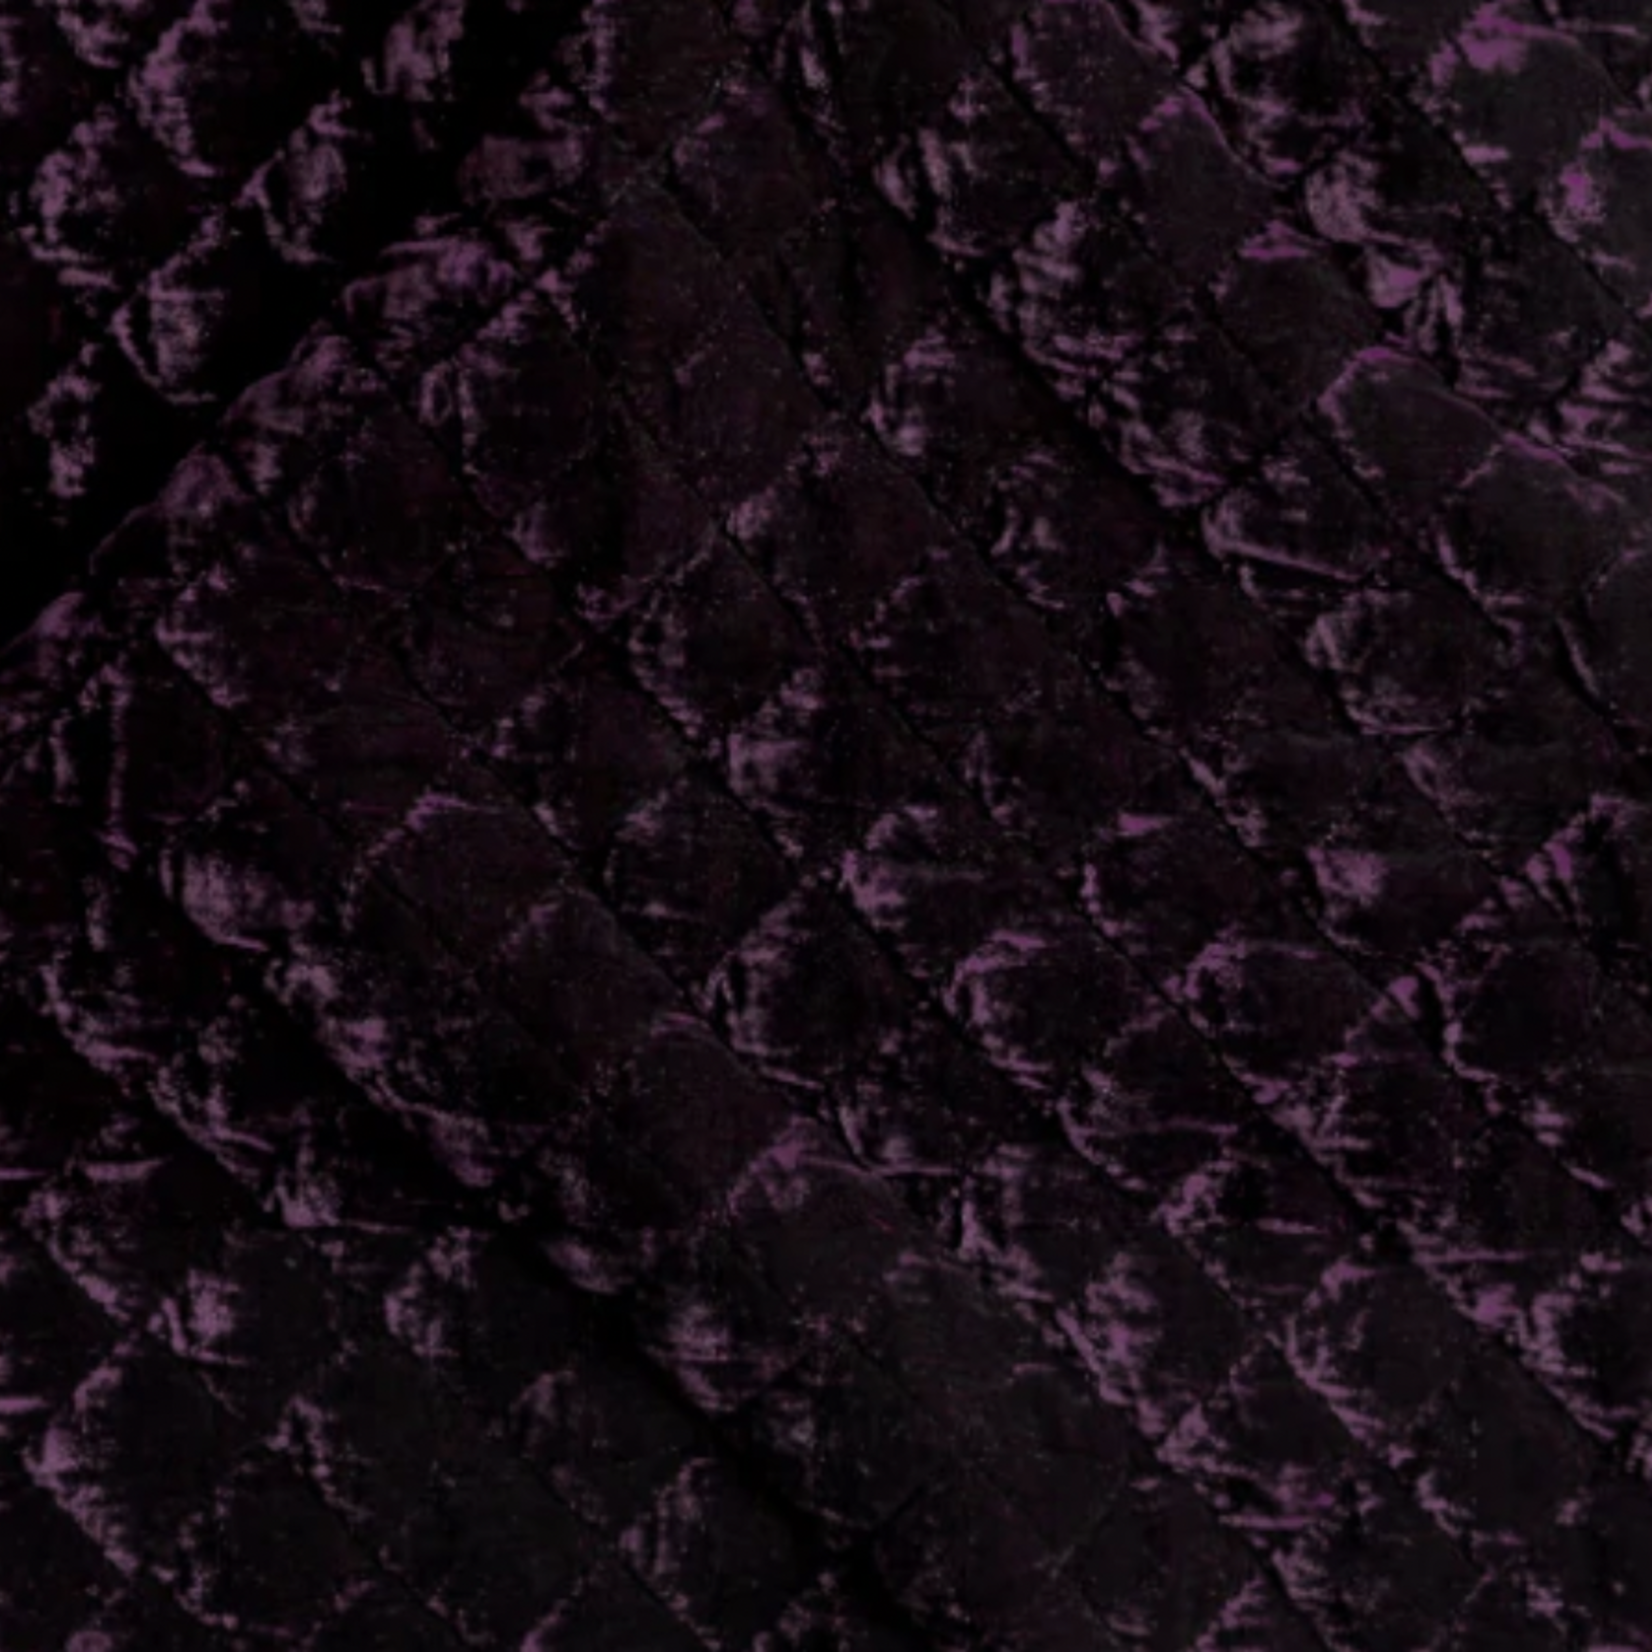 Bella Notte Silk Velvet Sham, Quilted with Satin Piping